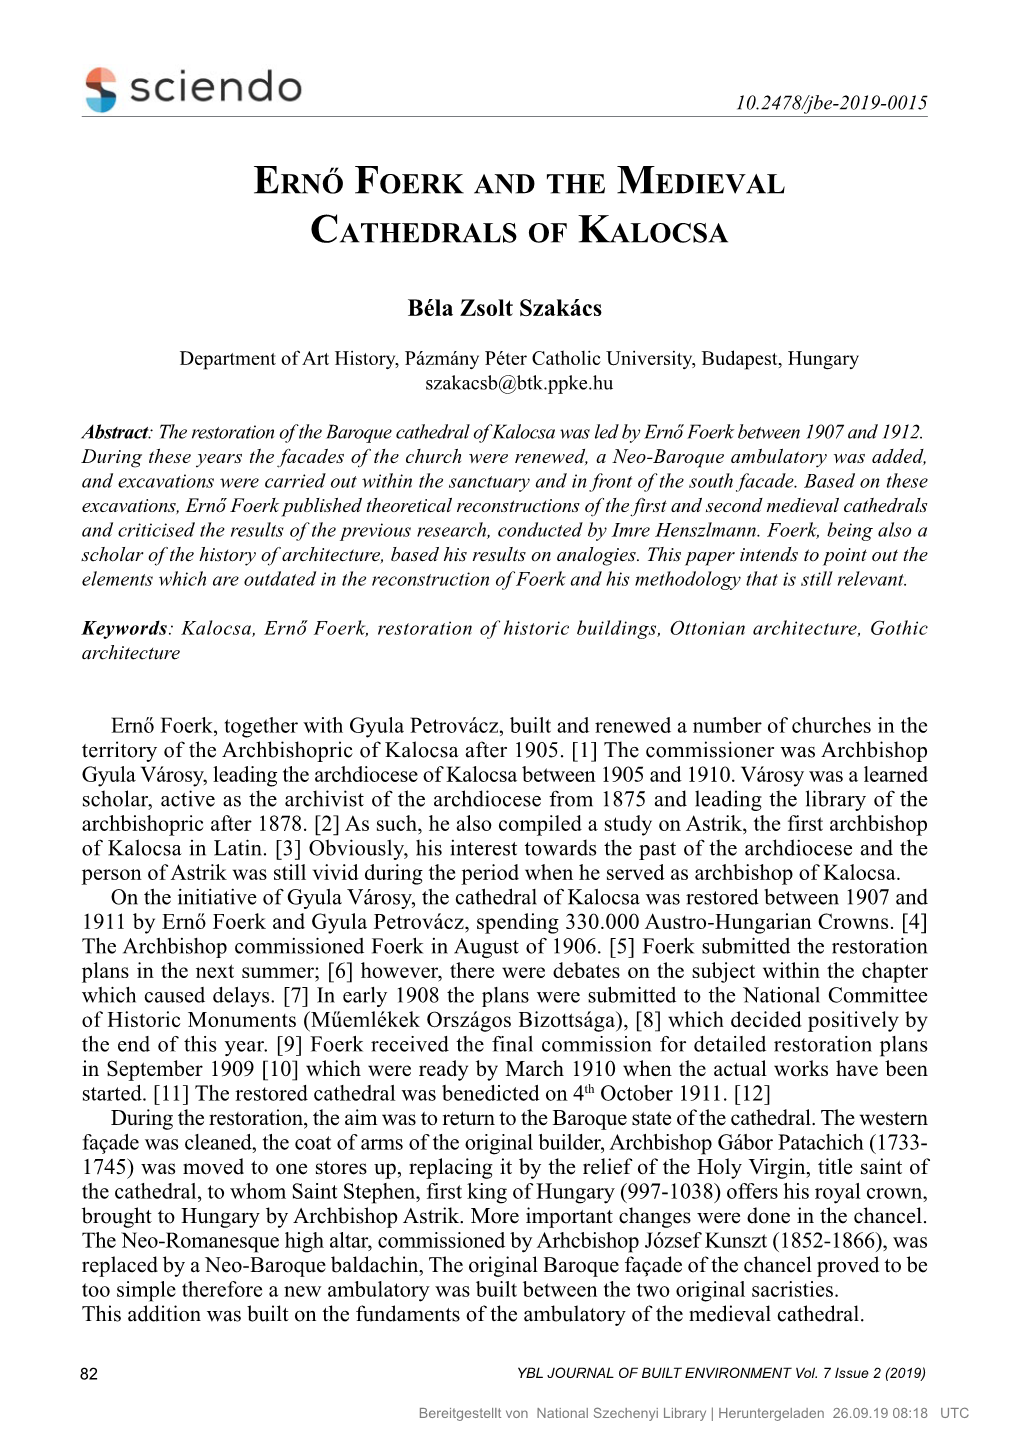 Ernő Foerk and the Medieval Cathedrals of Kalocsa